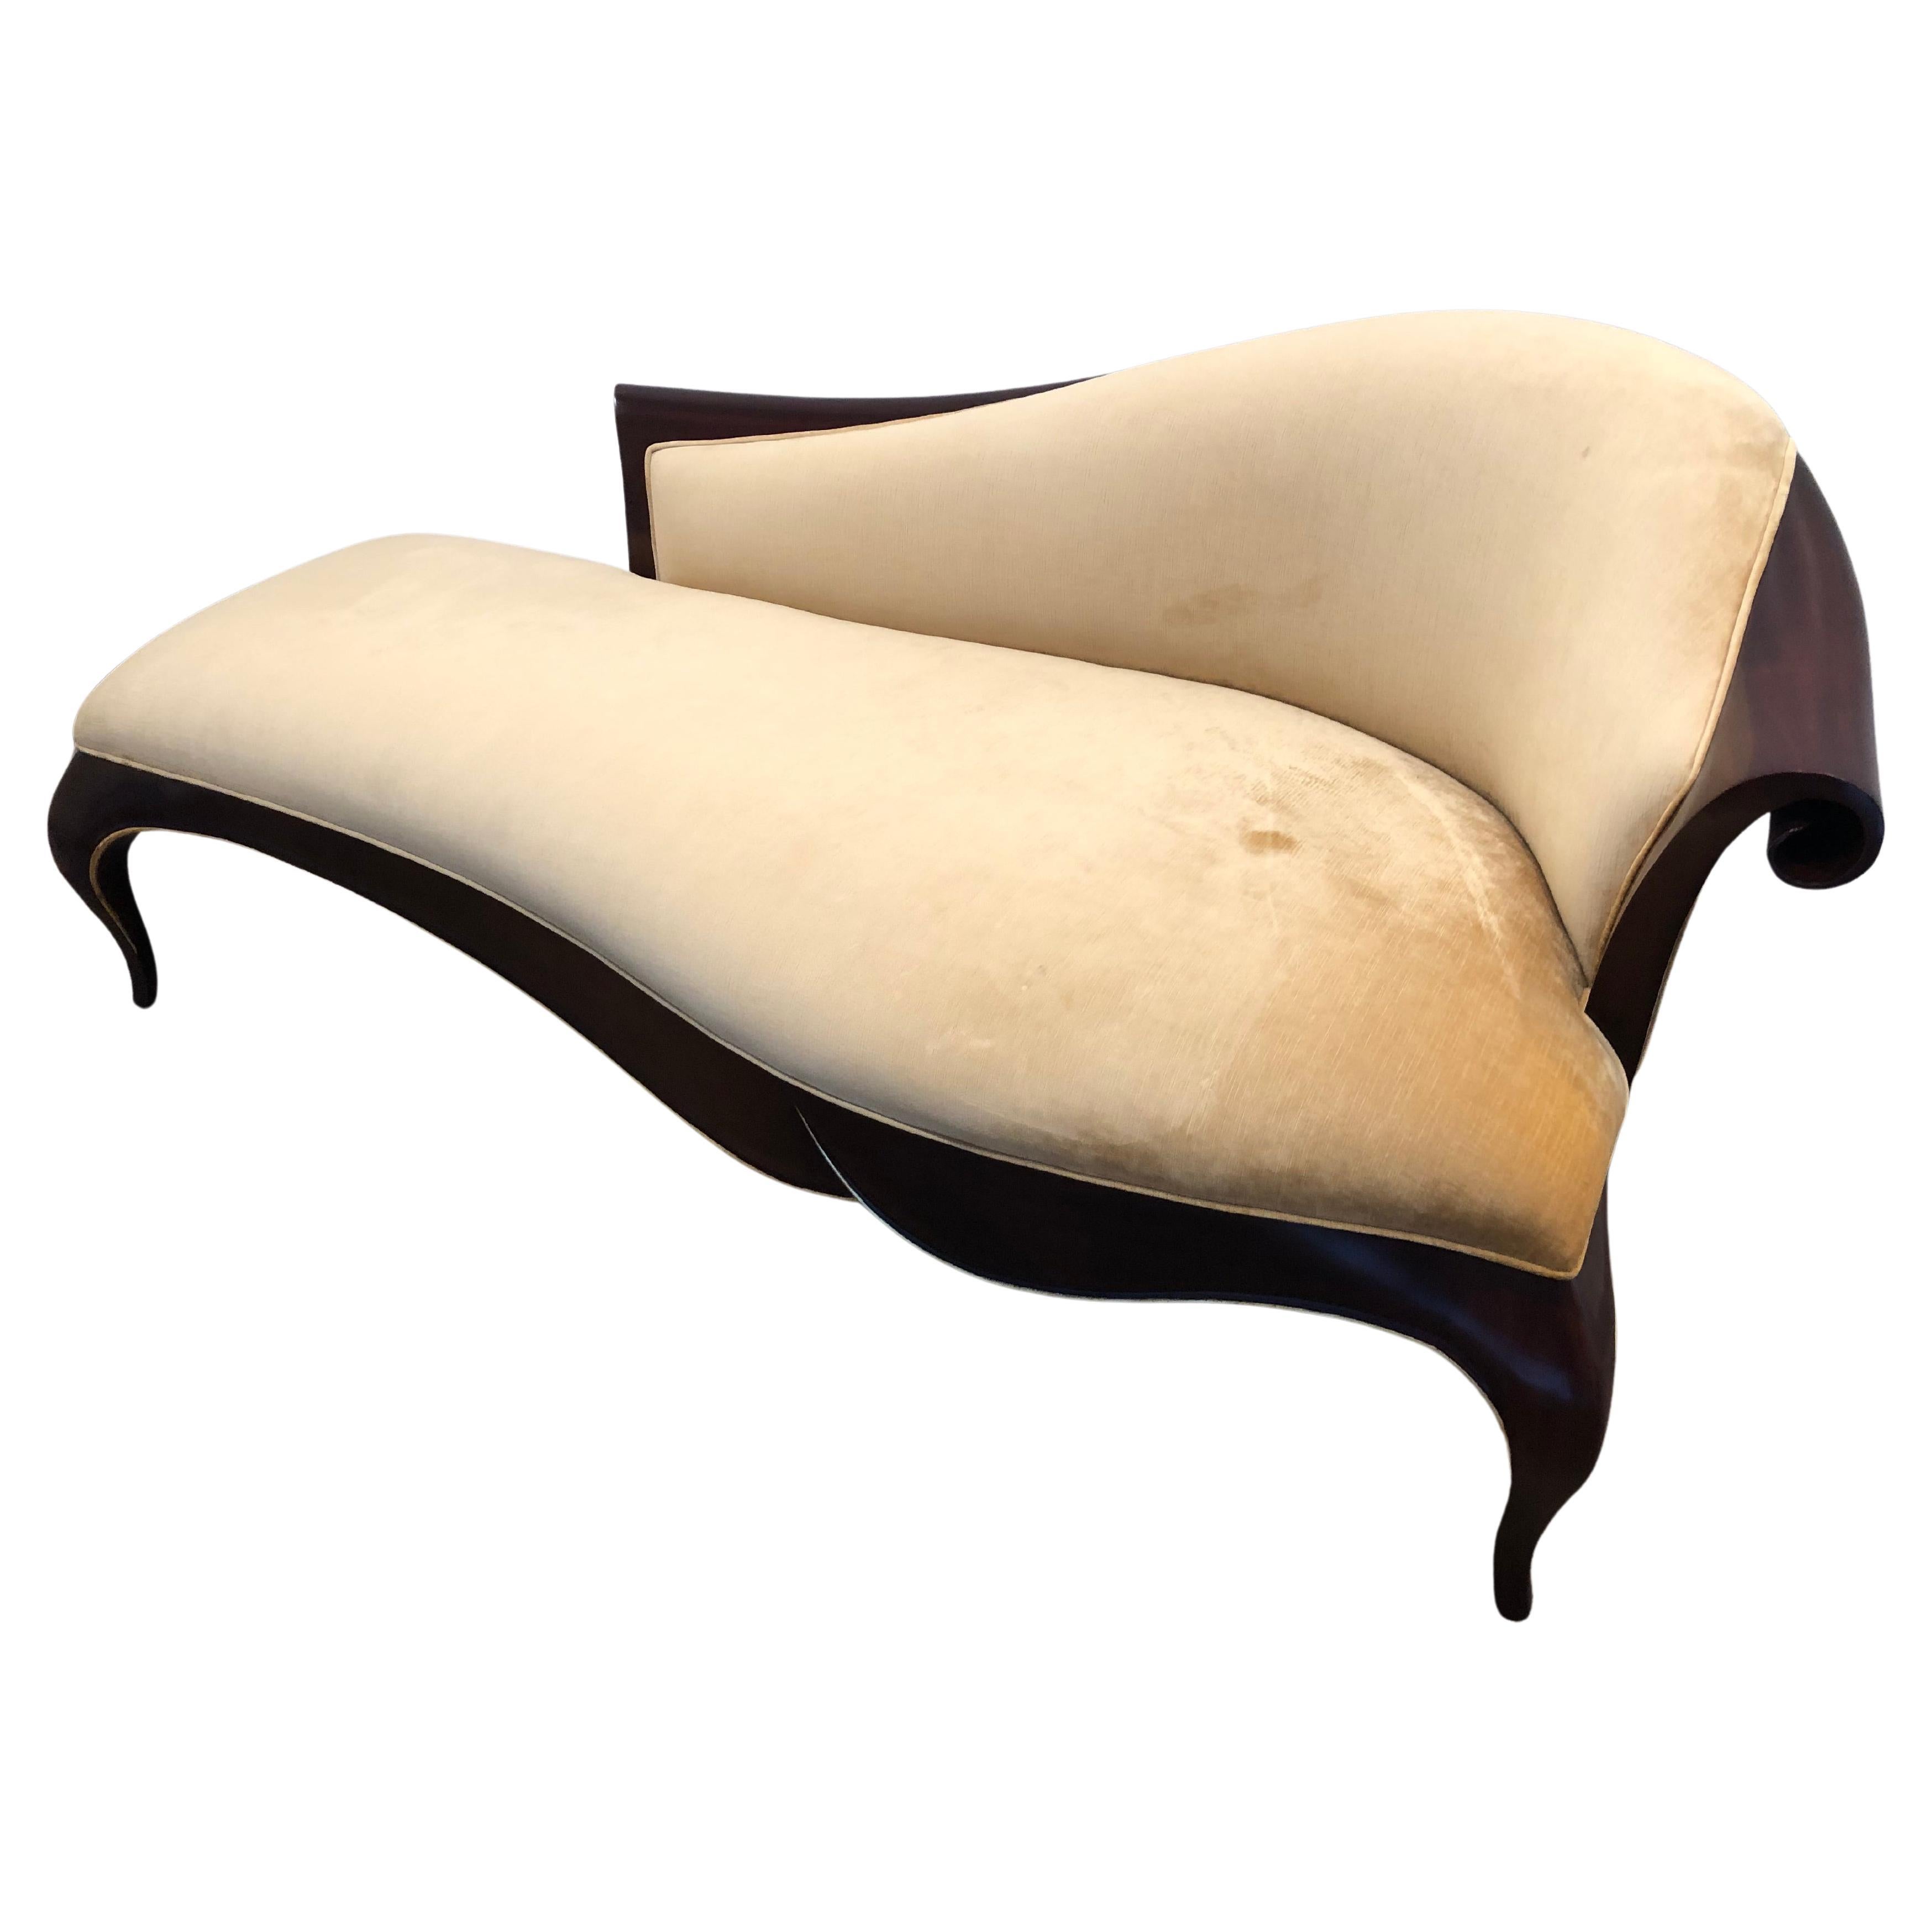 Moviestar glamourous chaise longue by Christopher Guy having sensual silhouette with art deco inspiration.  Beautiful glossy java finish mahogany with gilded edging and lovely velvet upholstery.  Pair of extra pillows included.